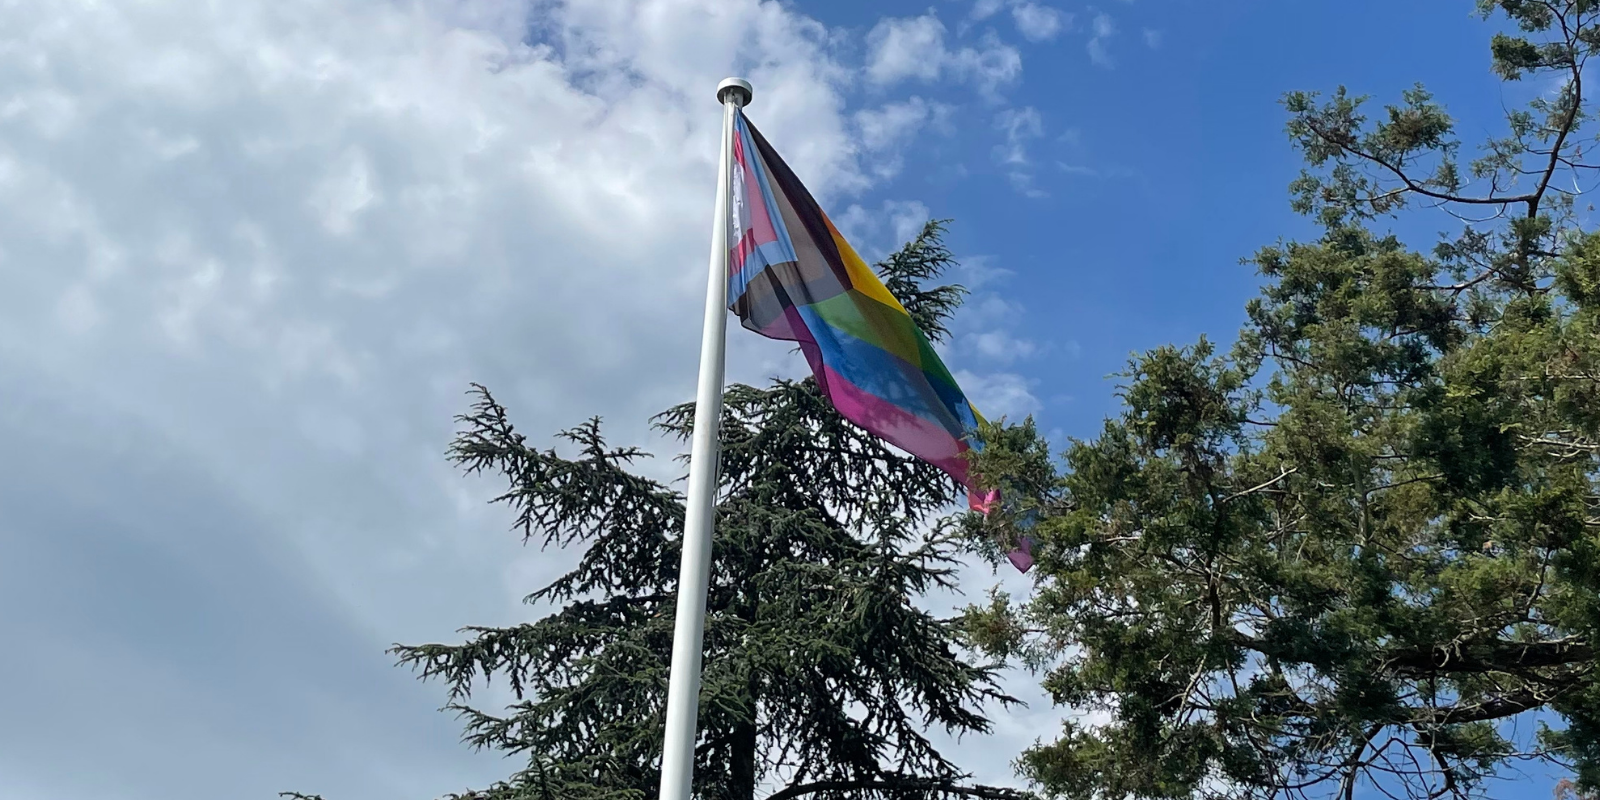 The rainbow flag flying on Whiteknights campus.